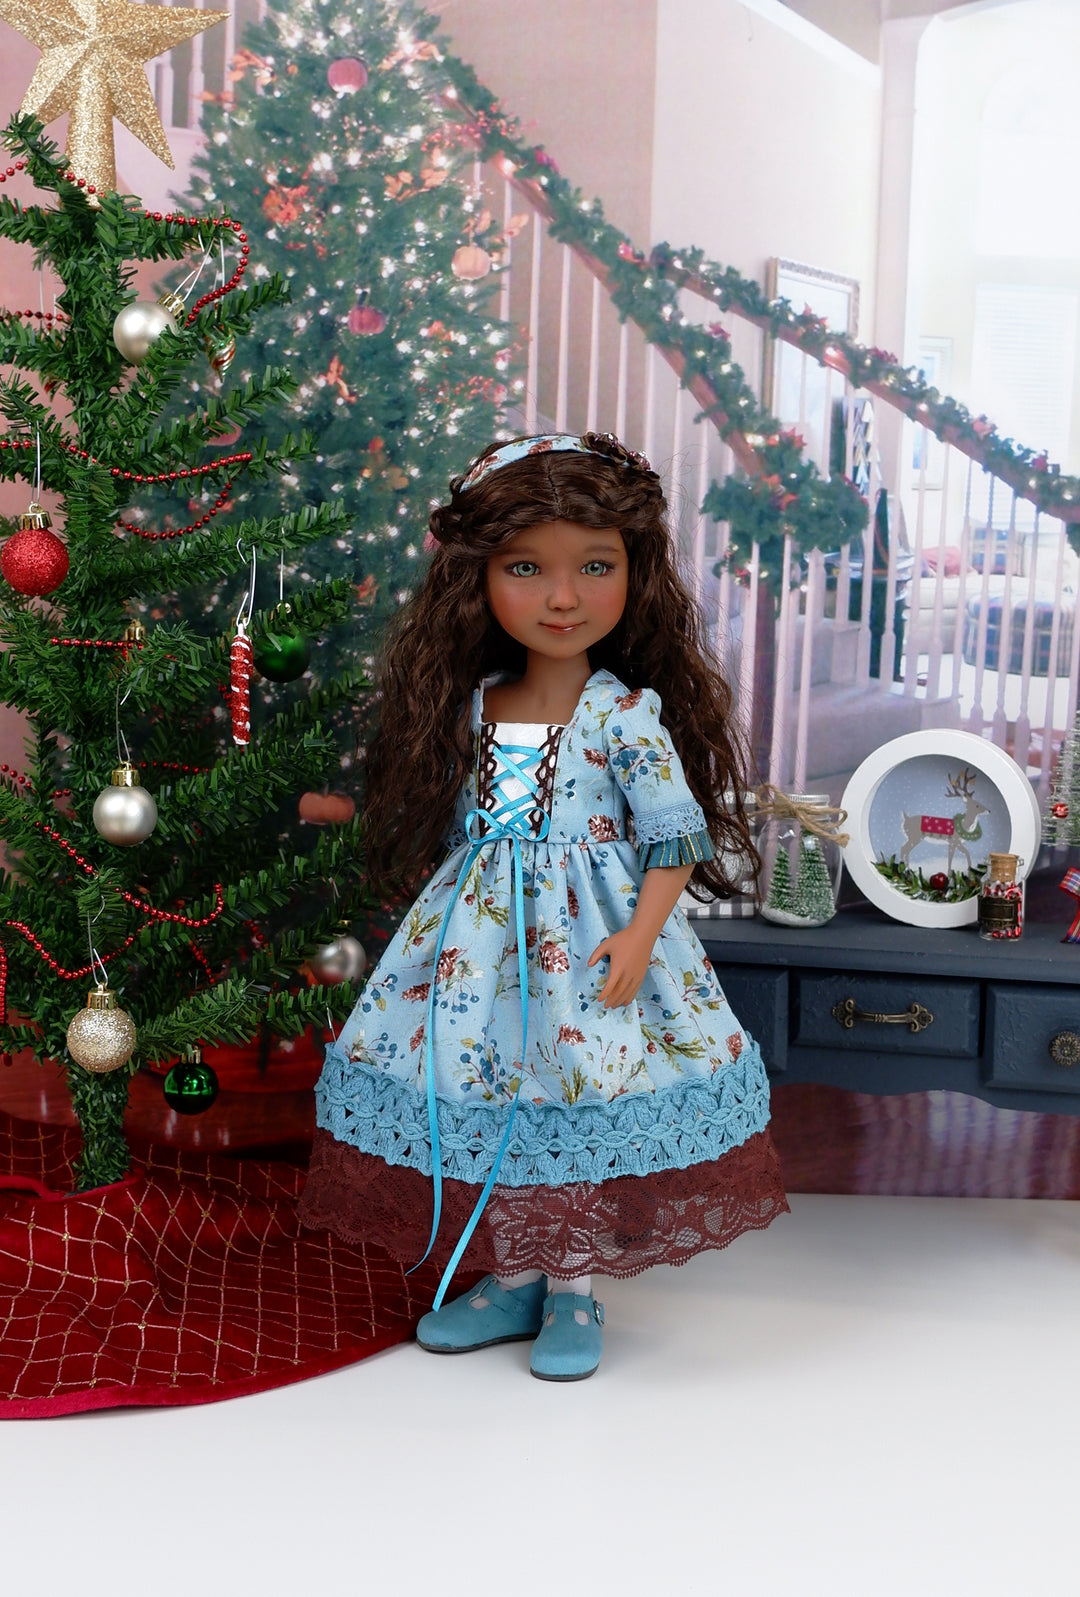 Winter Sugar Pine - dirndl dress ensemble with shoes for Ruby Red Fashion Friends doll